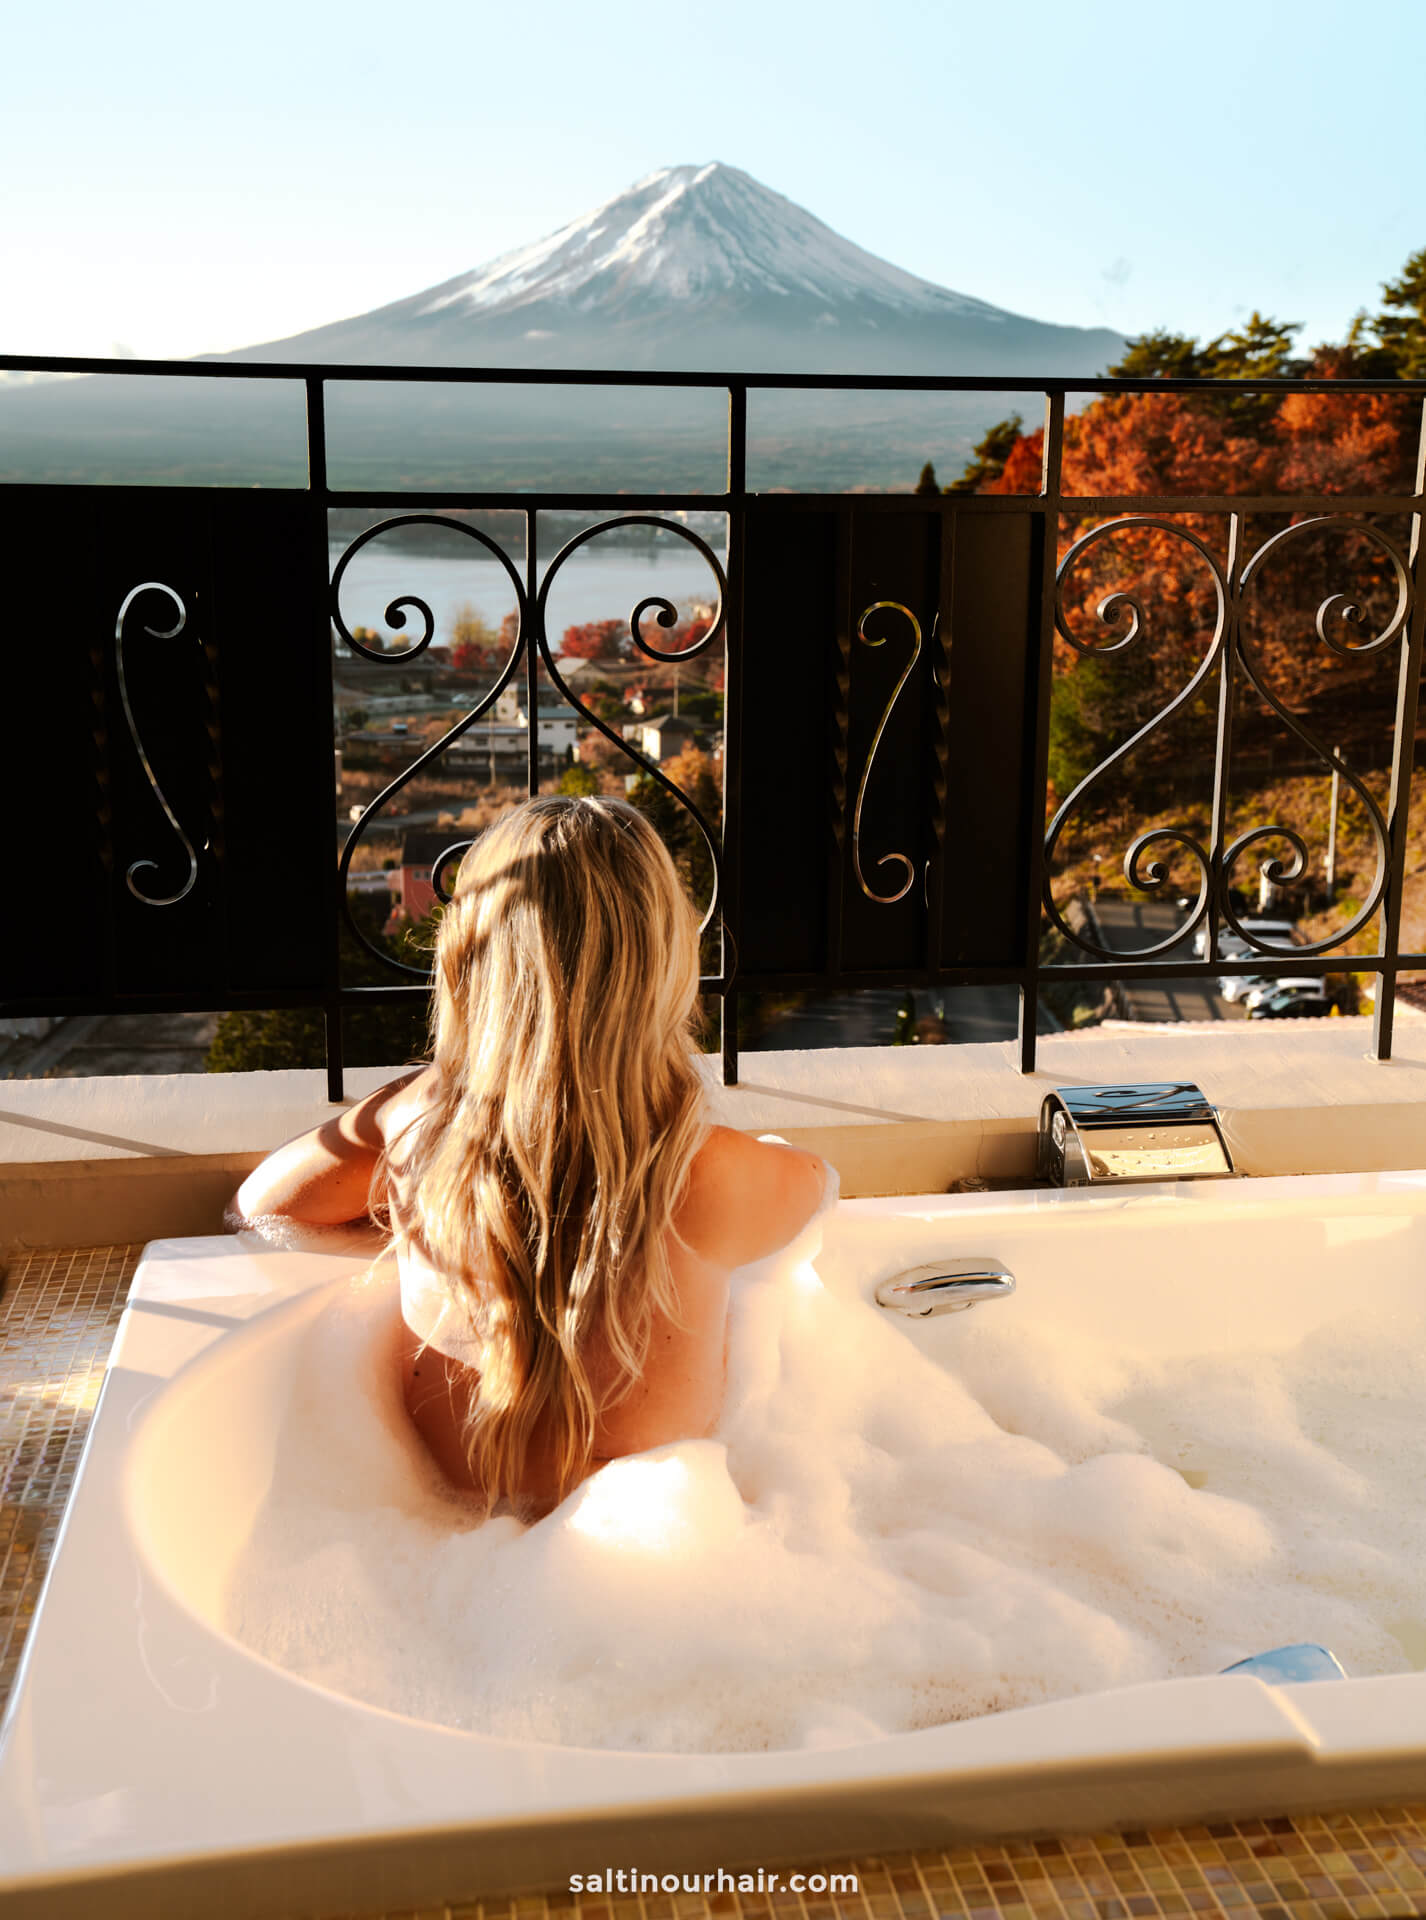 japan things to see mount fuji view hotel